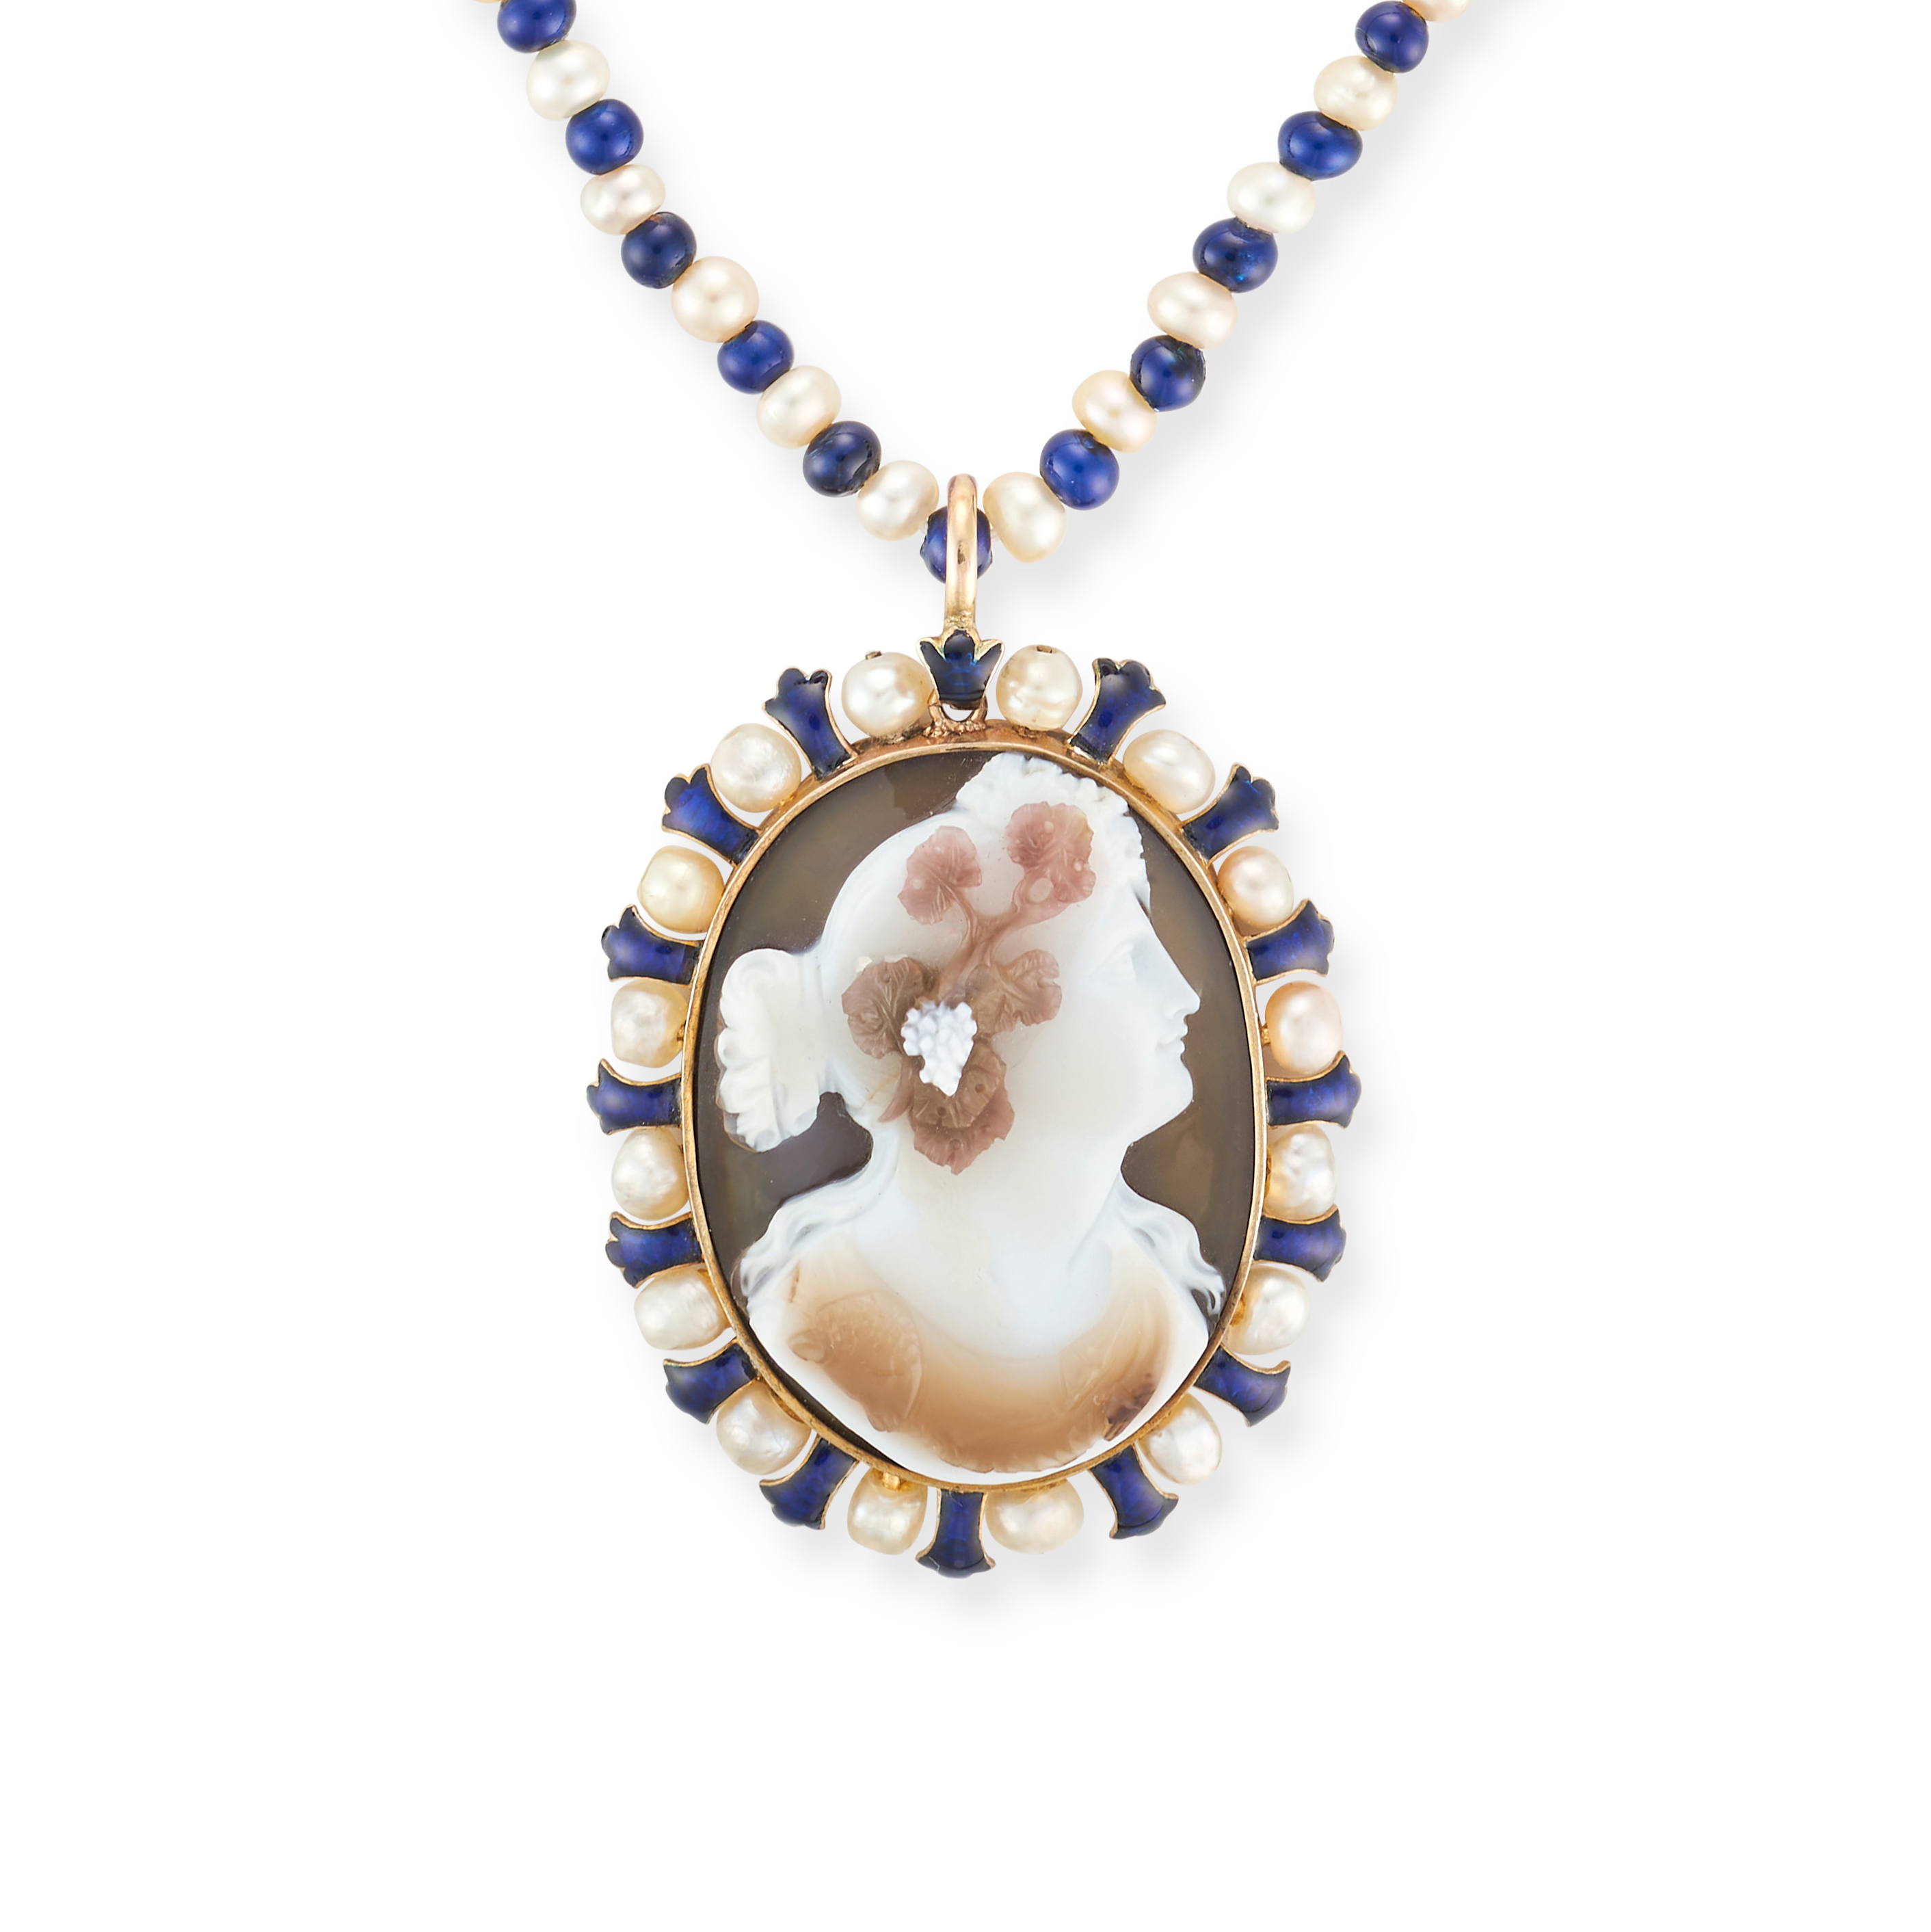 A NATURAL SALTWATER PEARL, AGATE CAMEO AND ENAMEL PENDANT NECKLACE the pendant set with an oval a...